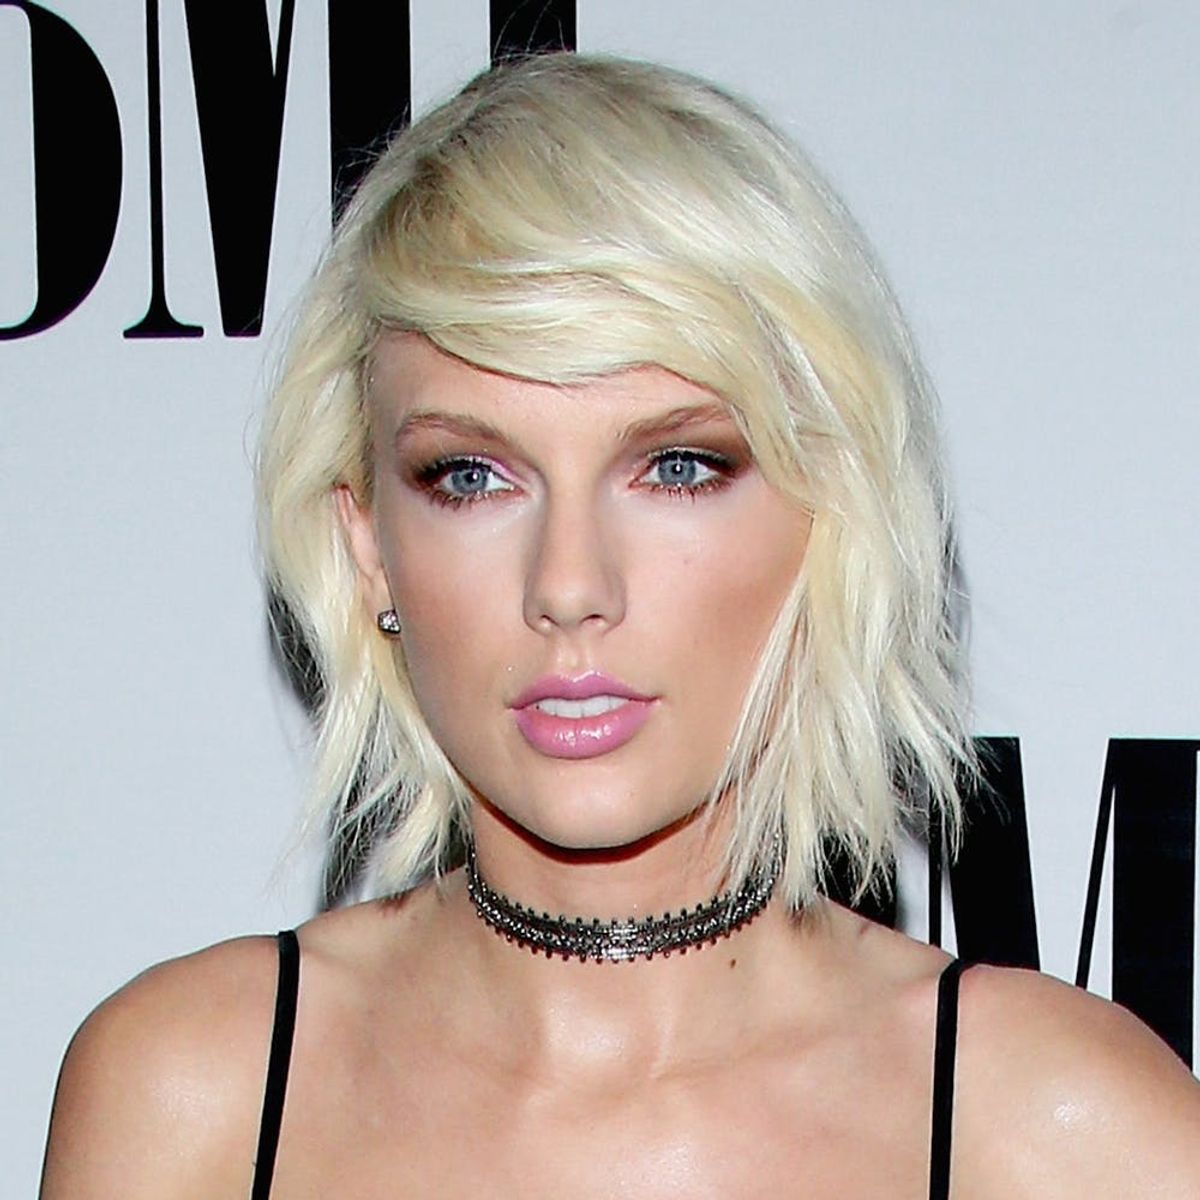 Taylor Swift Is Driving Fans Crazy With This Tease of Her New Song “Gorgeous”